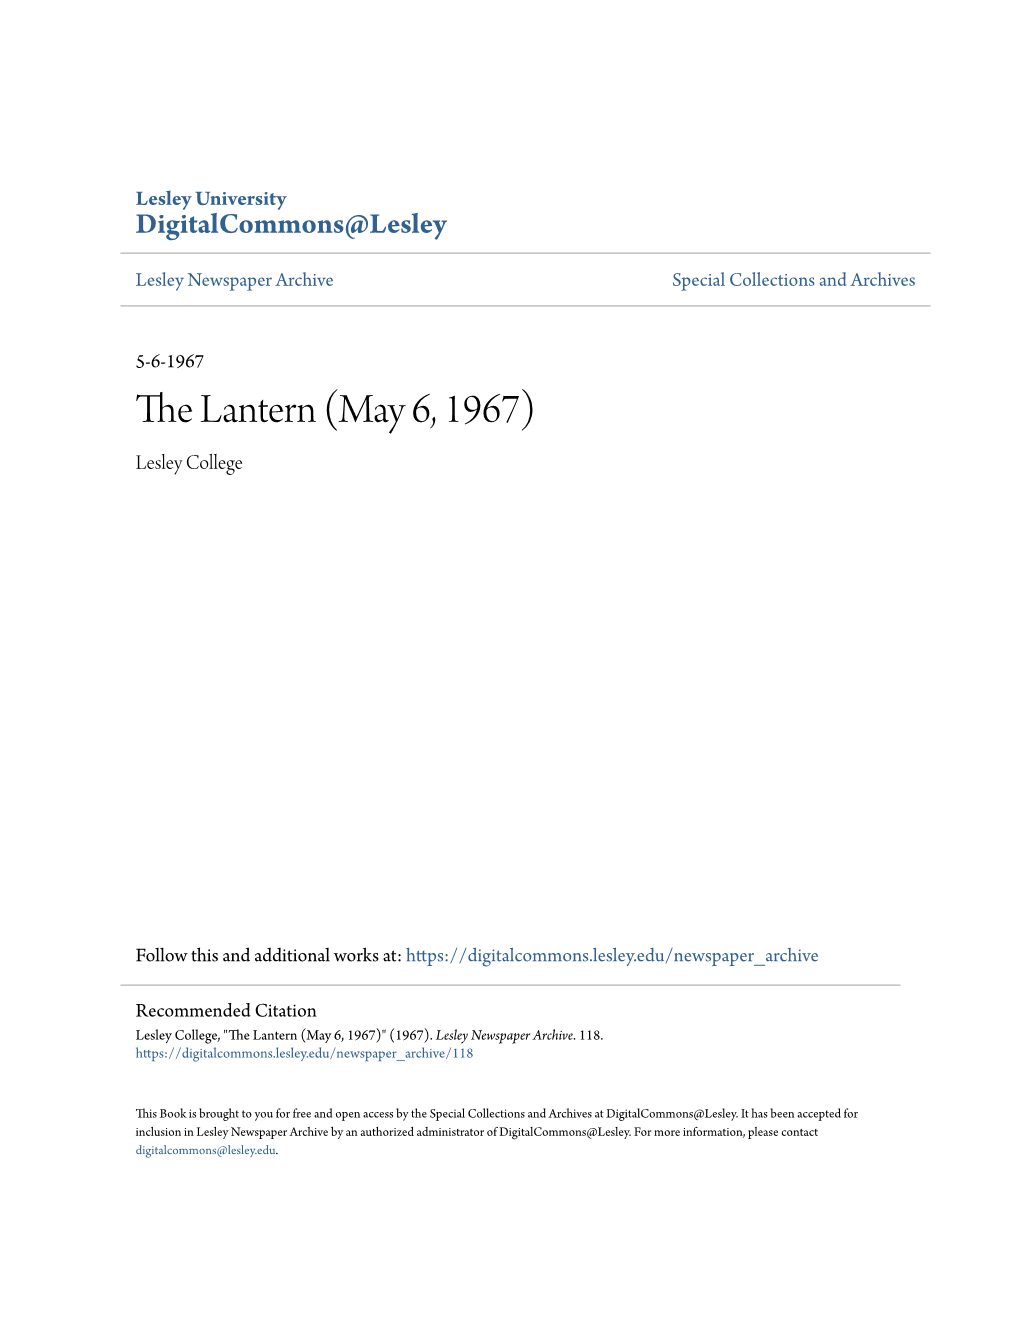 The Lantern (May 6, 1967) Lesley College